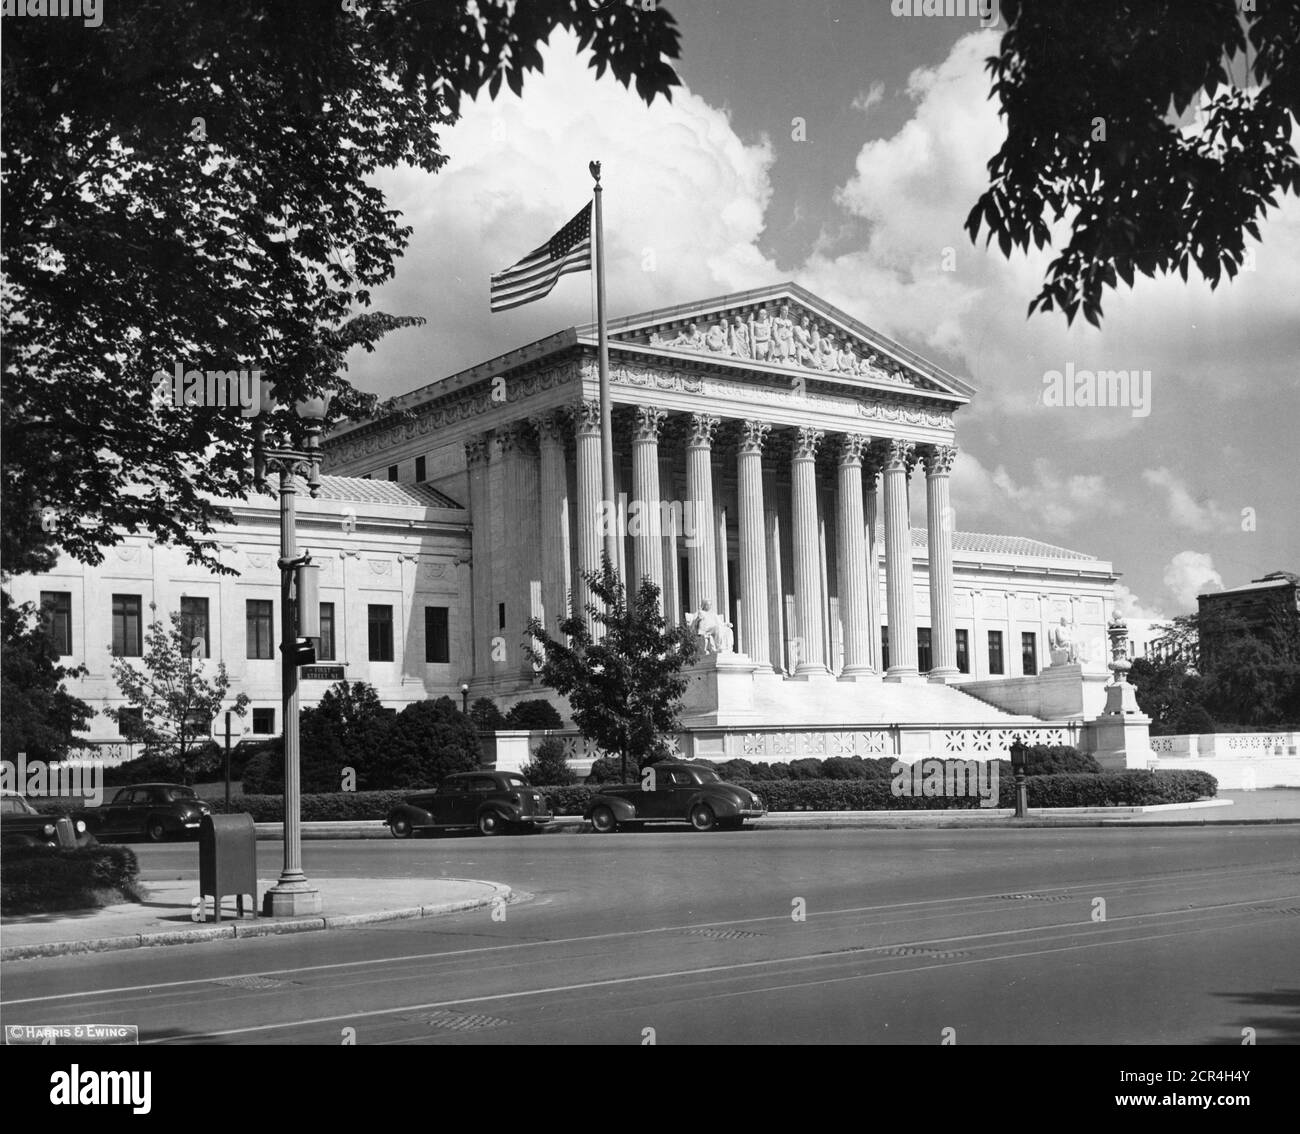 Exterior view of the Supreme Court Building, Washington, DC, circa 1944. (Photo by Office of War Information/RBM Vintage Images) Stock Photo